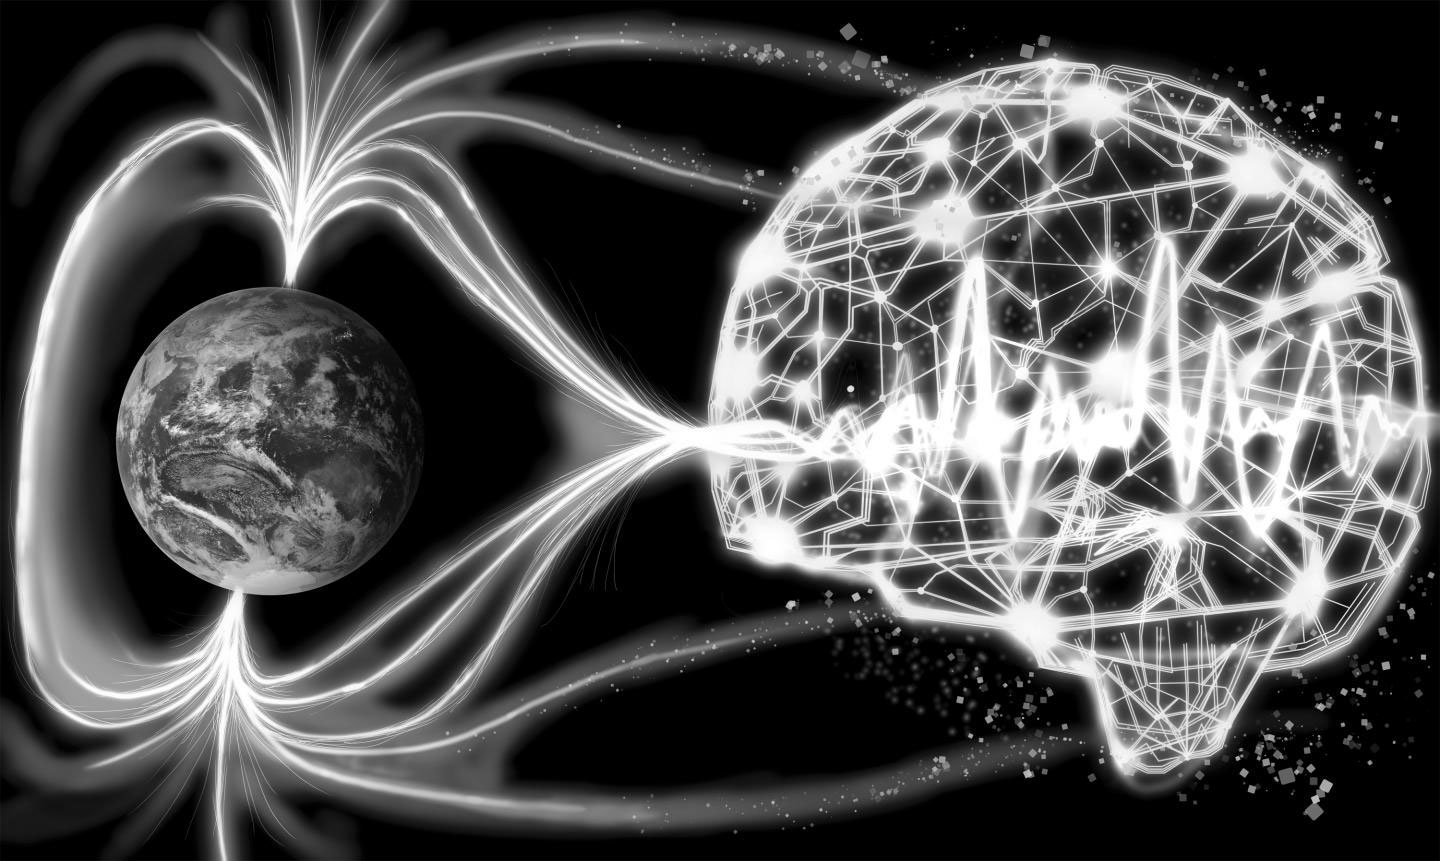 Deep Neural Networks (DNNs) have been applied to accurately predict the magnetic field of the Earth at specific locations. CREDIT Kan Okubo